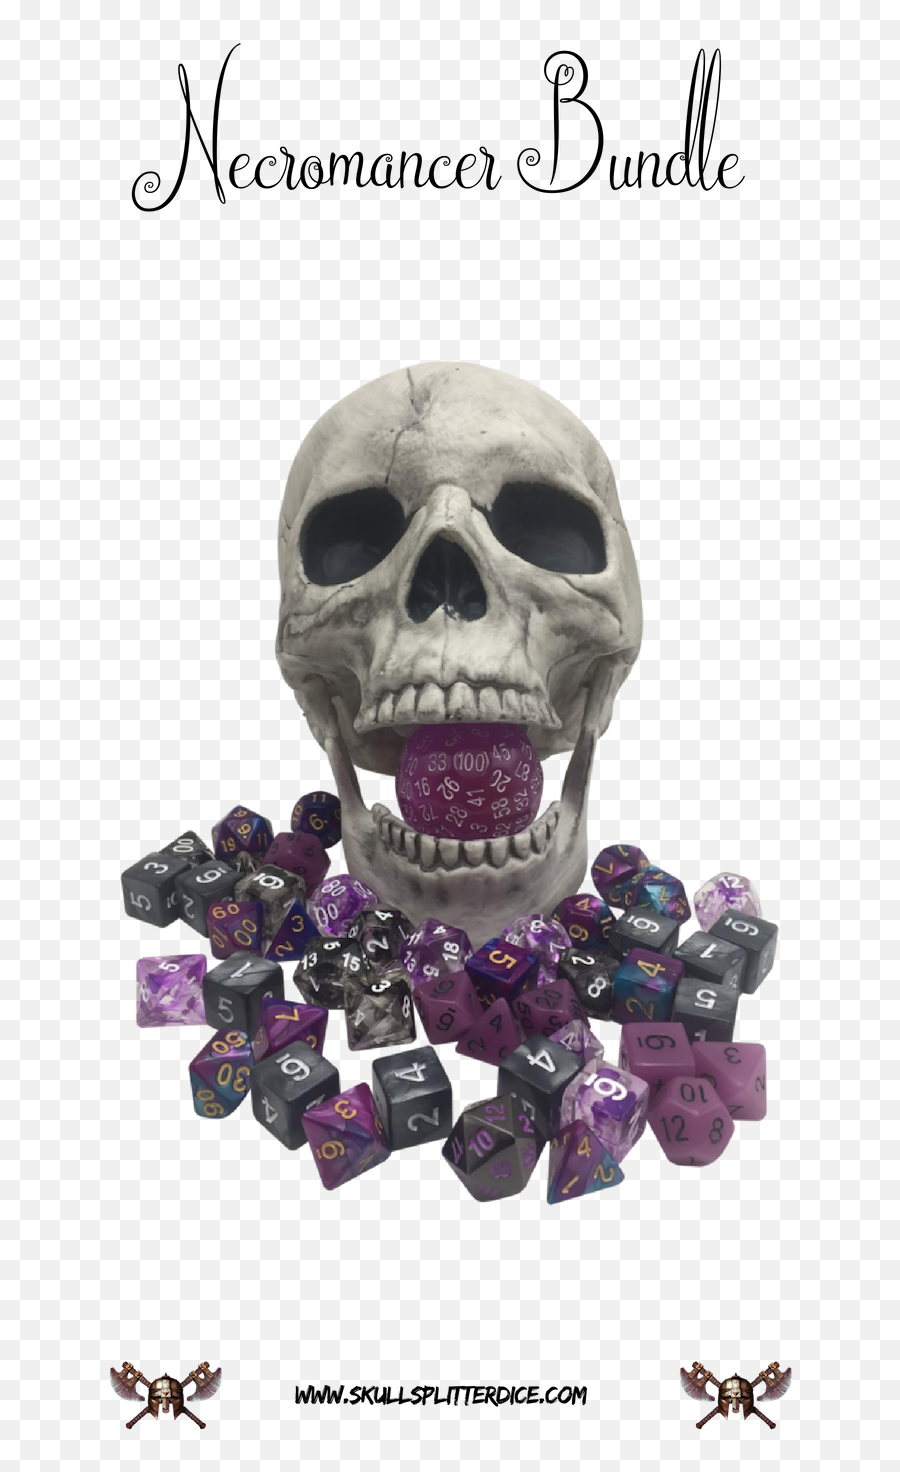 Pin By Taylor Wilcox On Dnd Me Dungeons And Dragons Gifts Emoji,Dnd Dice Png